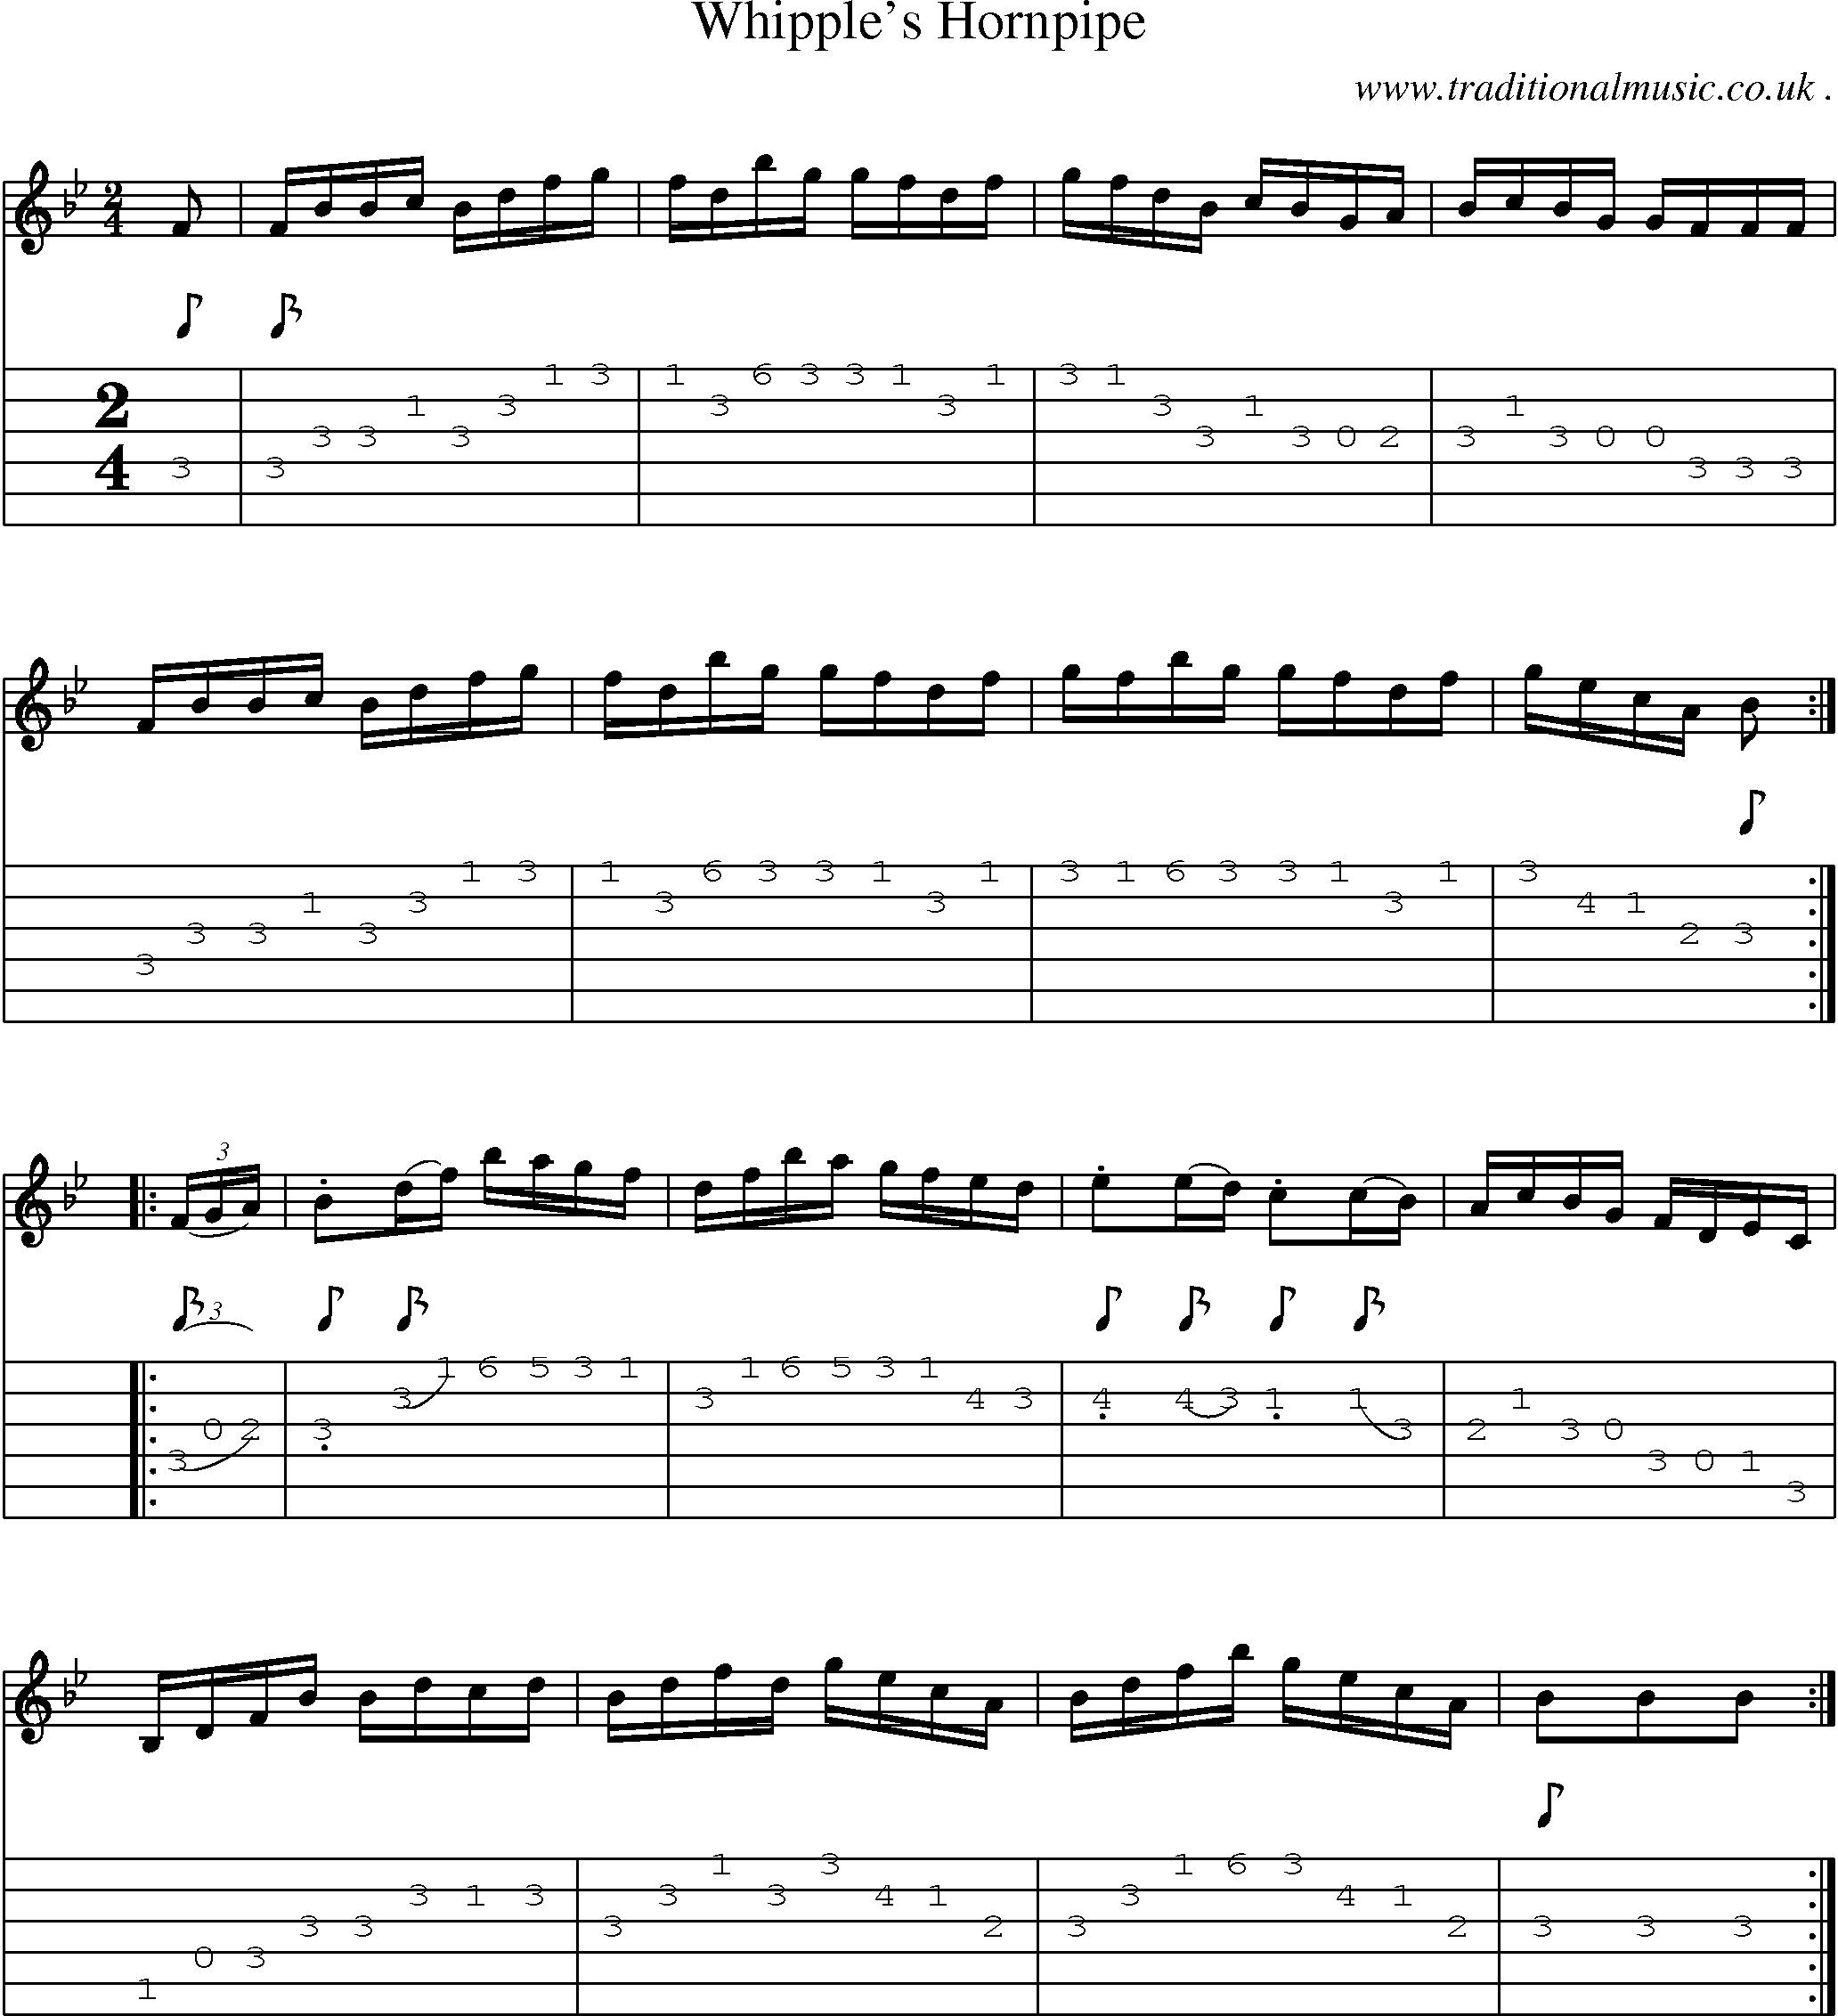 Sheet-Music and Guitar Tabs for Whipples Hornpipe